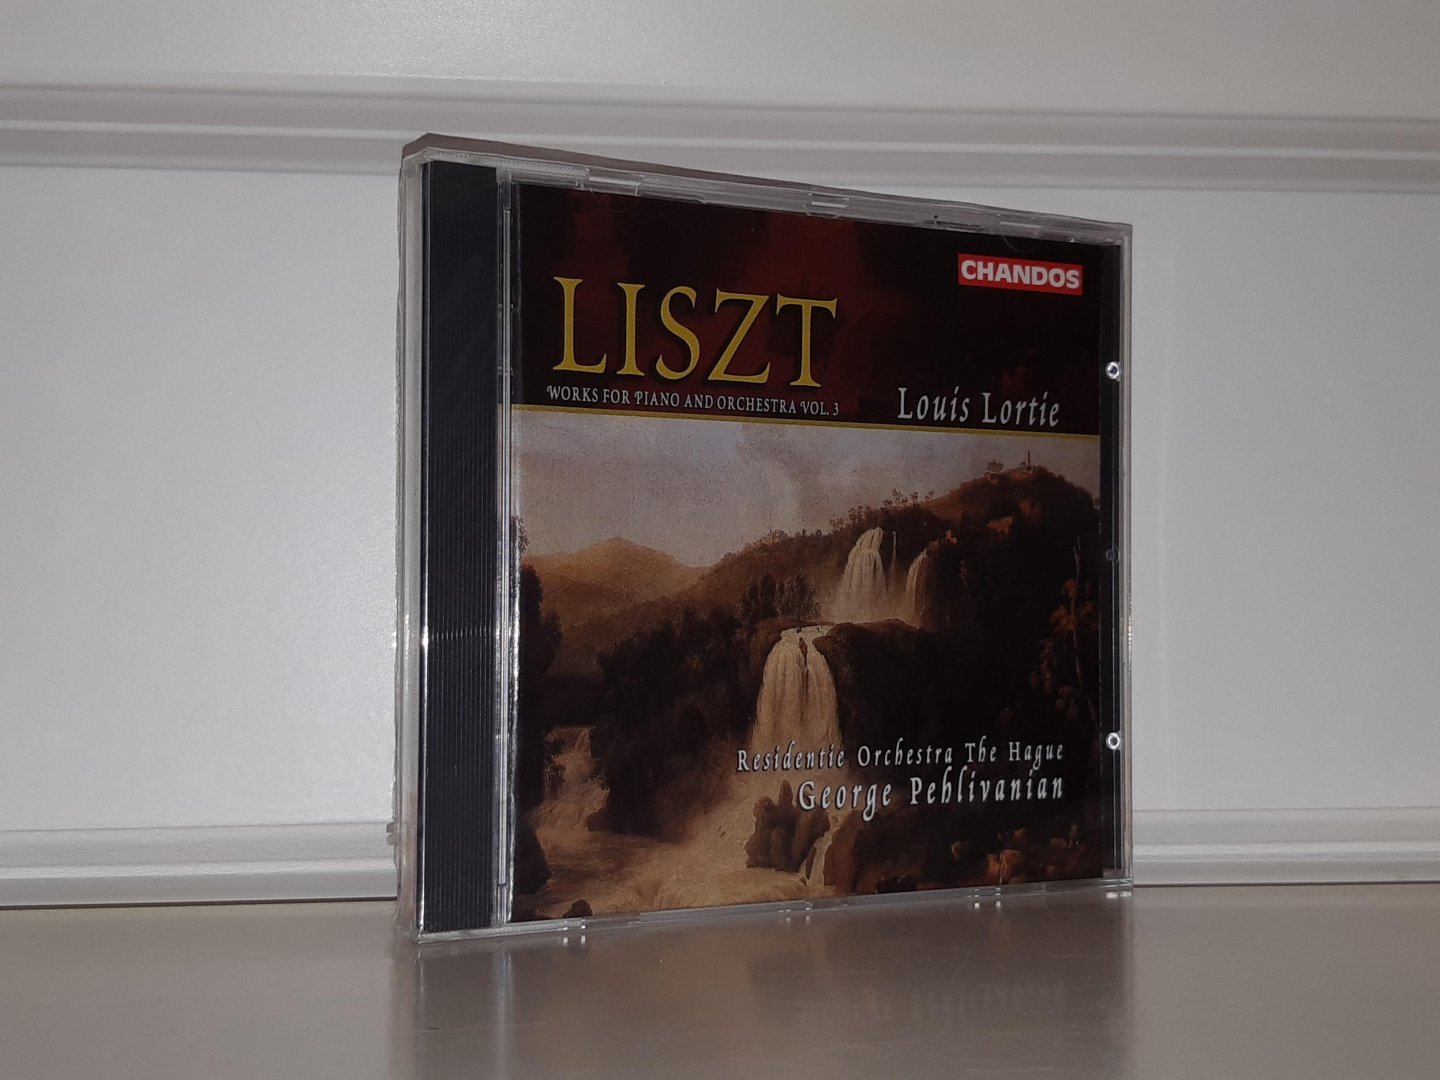 Lortie, Louis - Liszt. Works for piano and orchestra vol. 3. Residentie Orchestra The Hague. George Pehlivanian